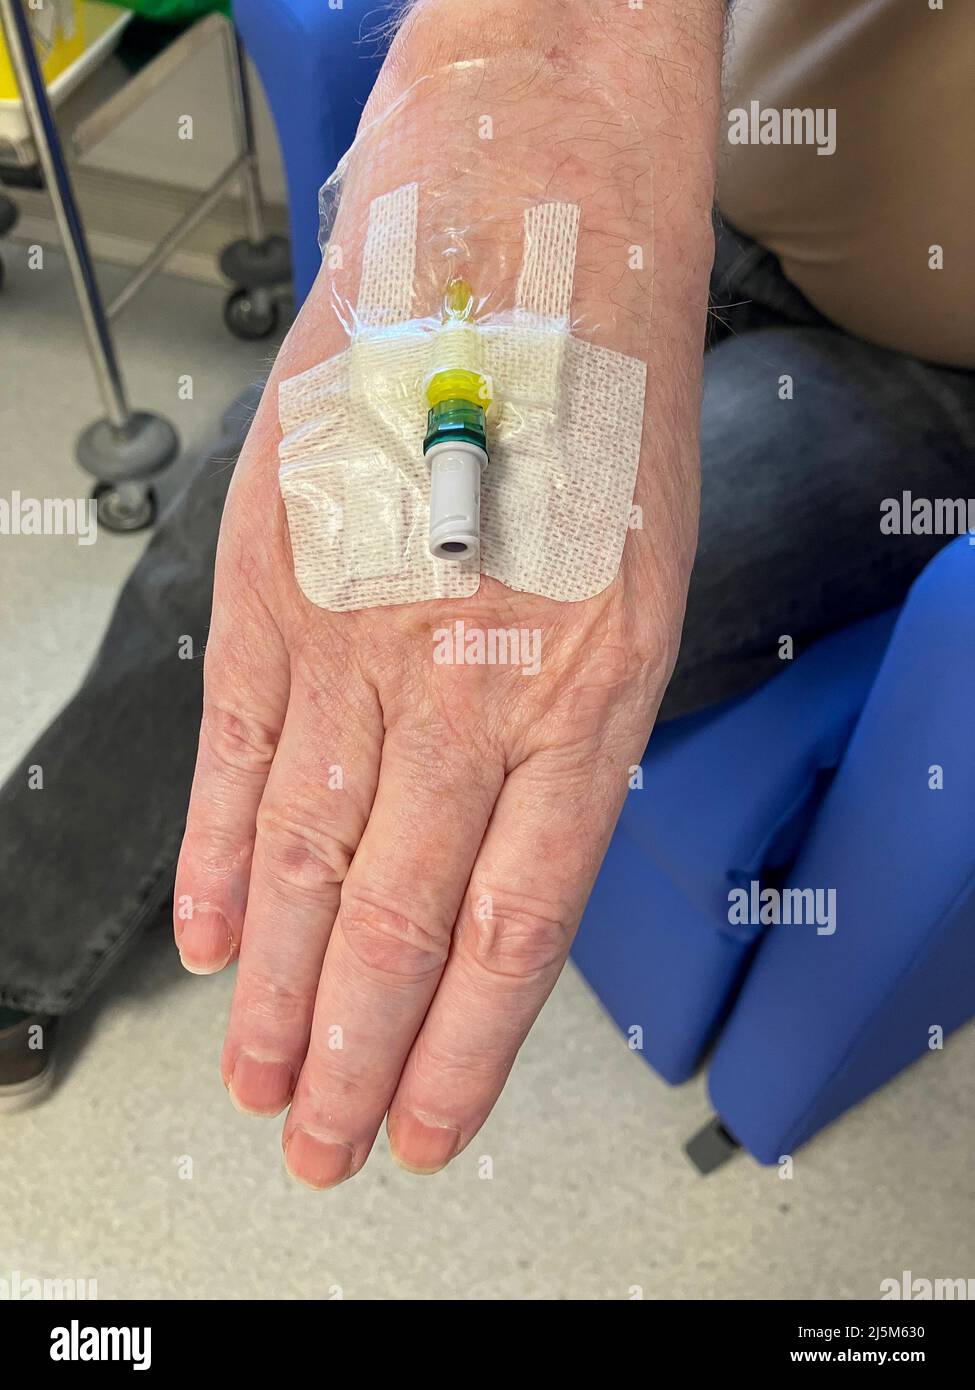 Male patient with Cannula inserted for chemotherapy drip infusion in medical hospital Stock Photo